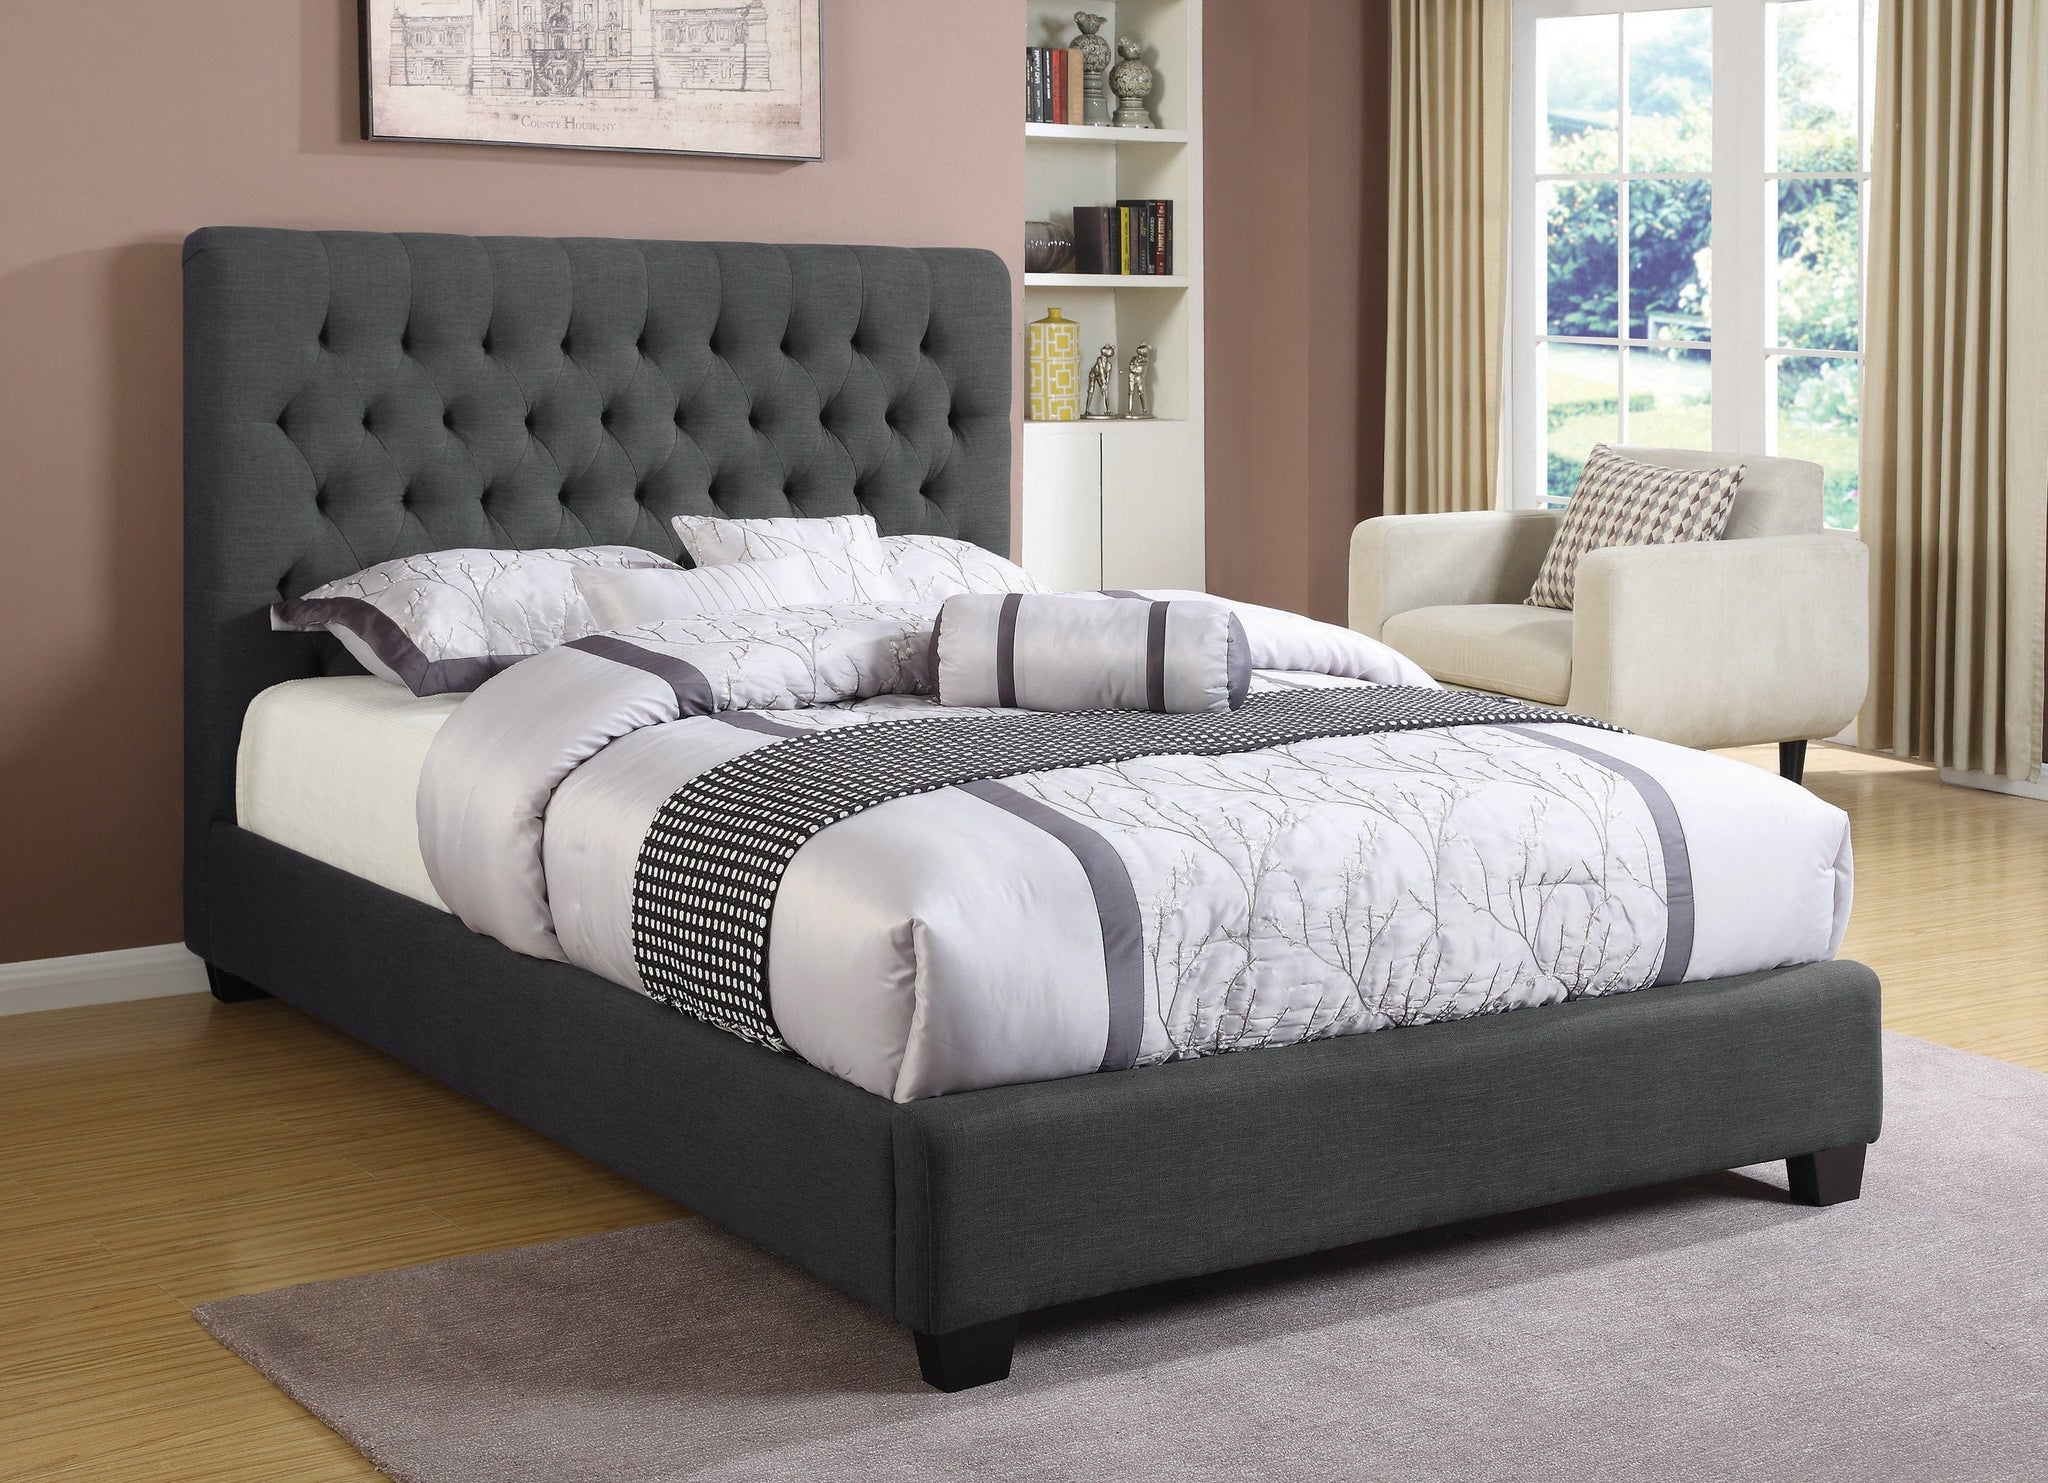 Chloe Tufted Upholstered Full Bed Charcoal - 300529F